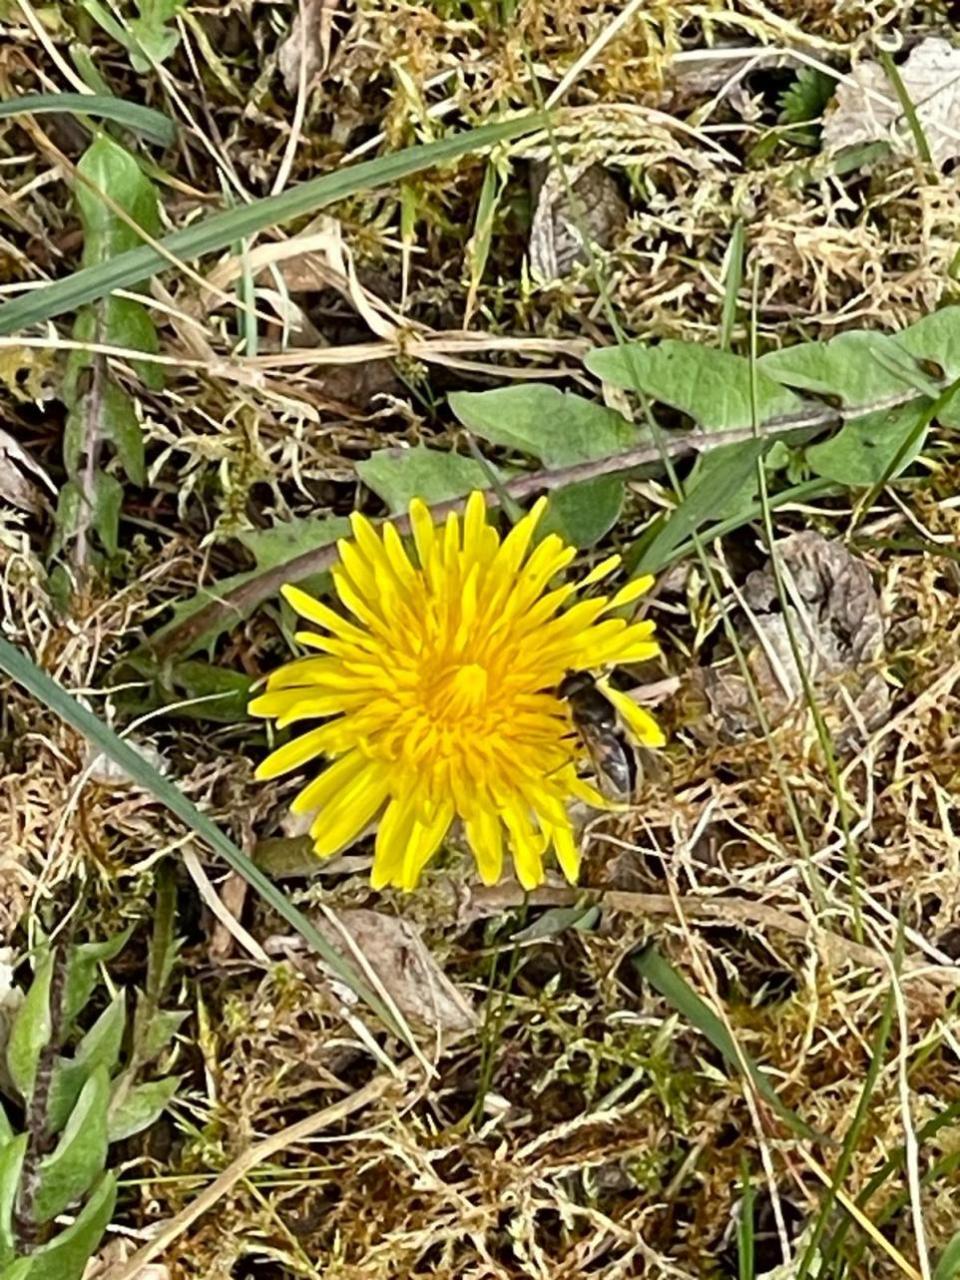 Impartial Reporter: A bee approaches a dandelion.